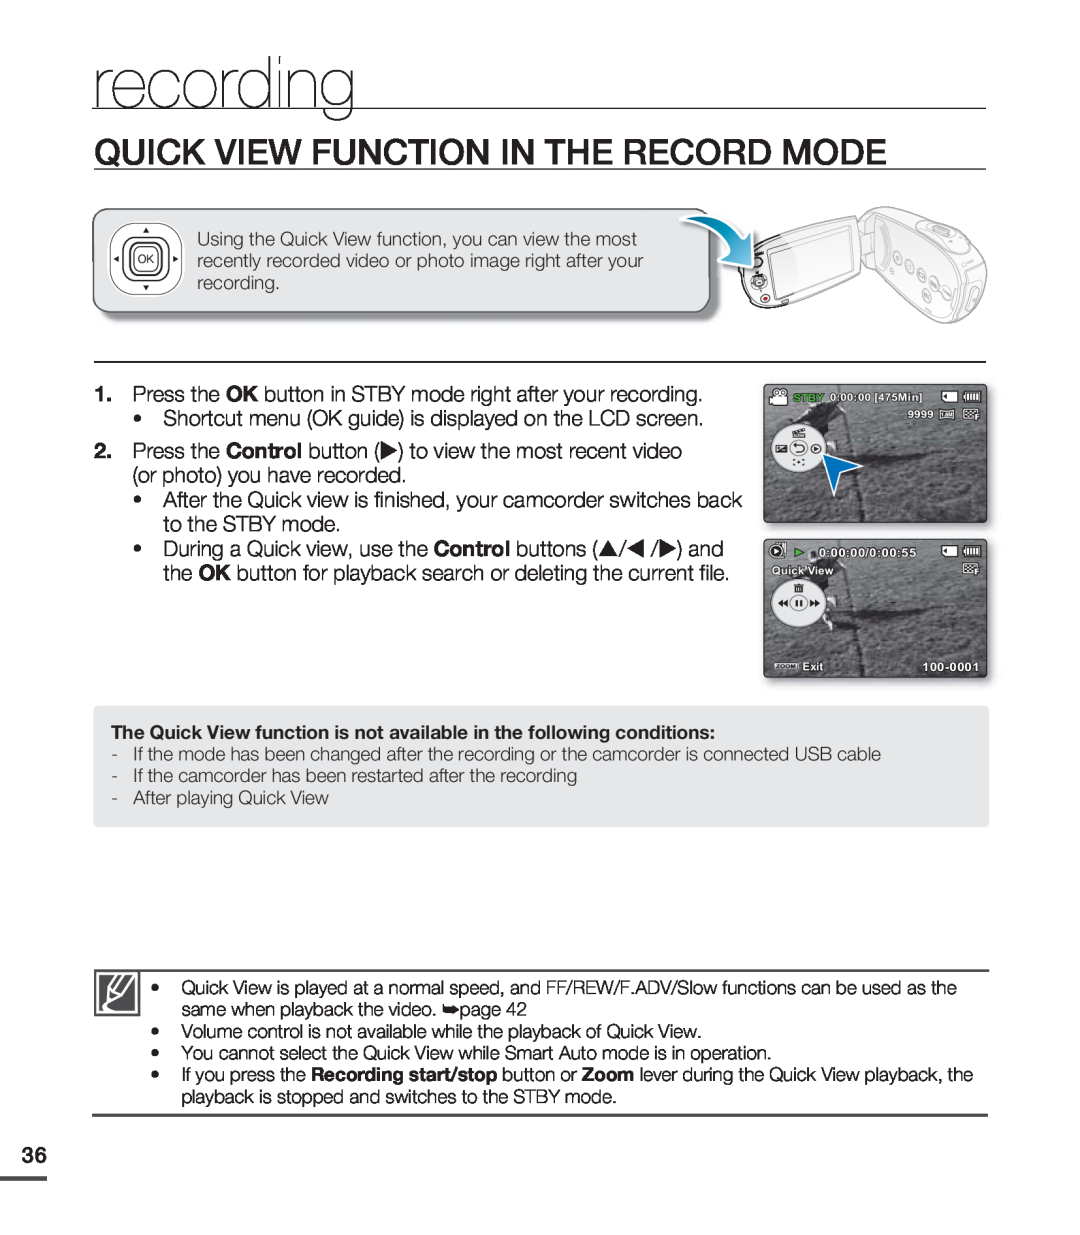 Samsung SMX-C20RP/MEA Quick View Function In The Record Mode, Press the OK button in STBY mode right after your recording 